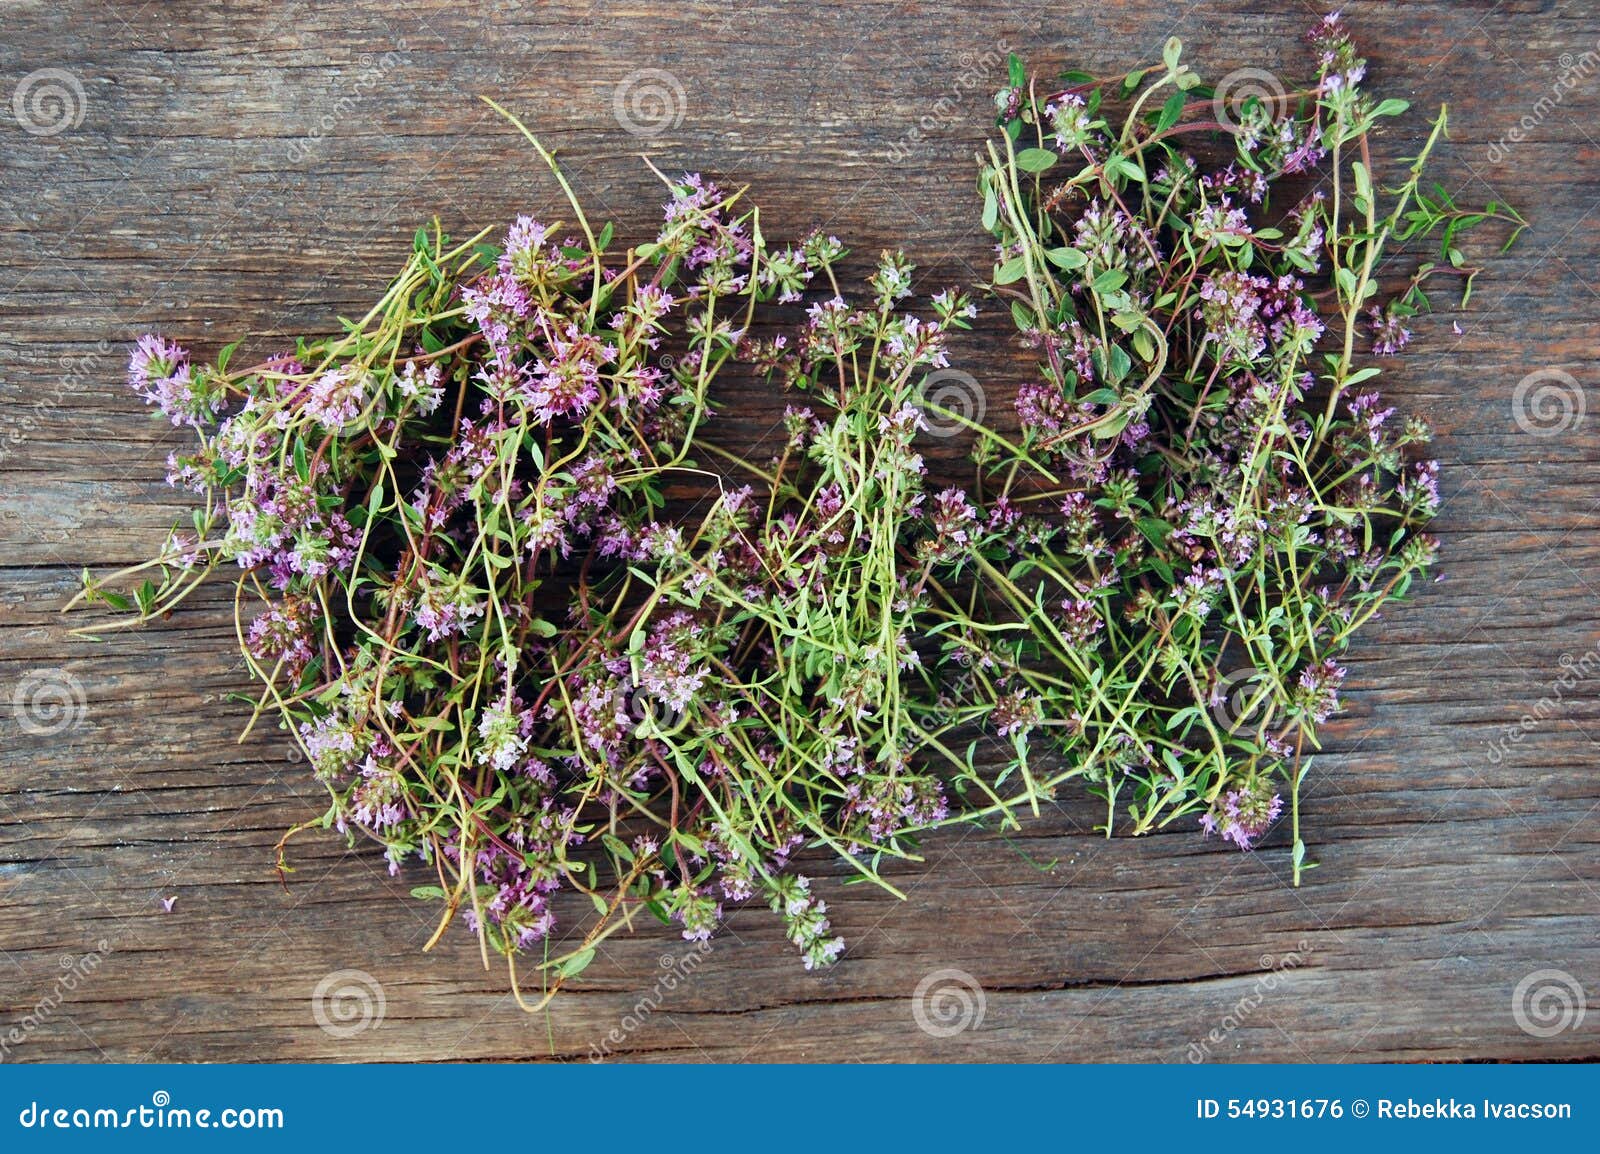 Fresh thyme on wooden table